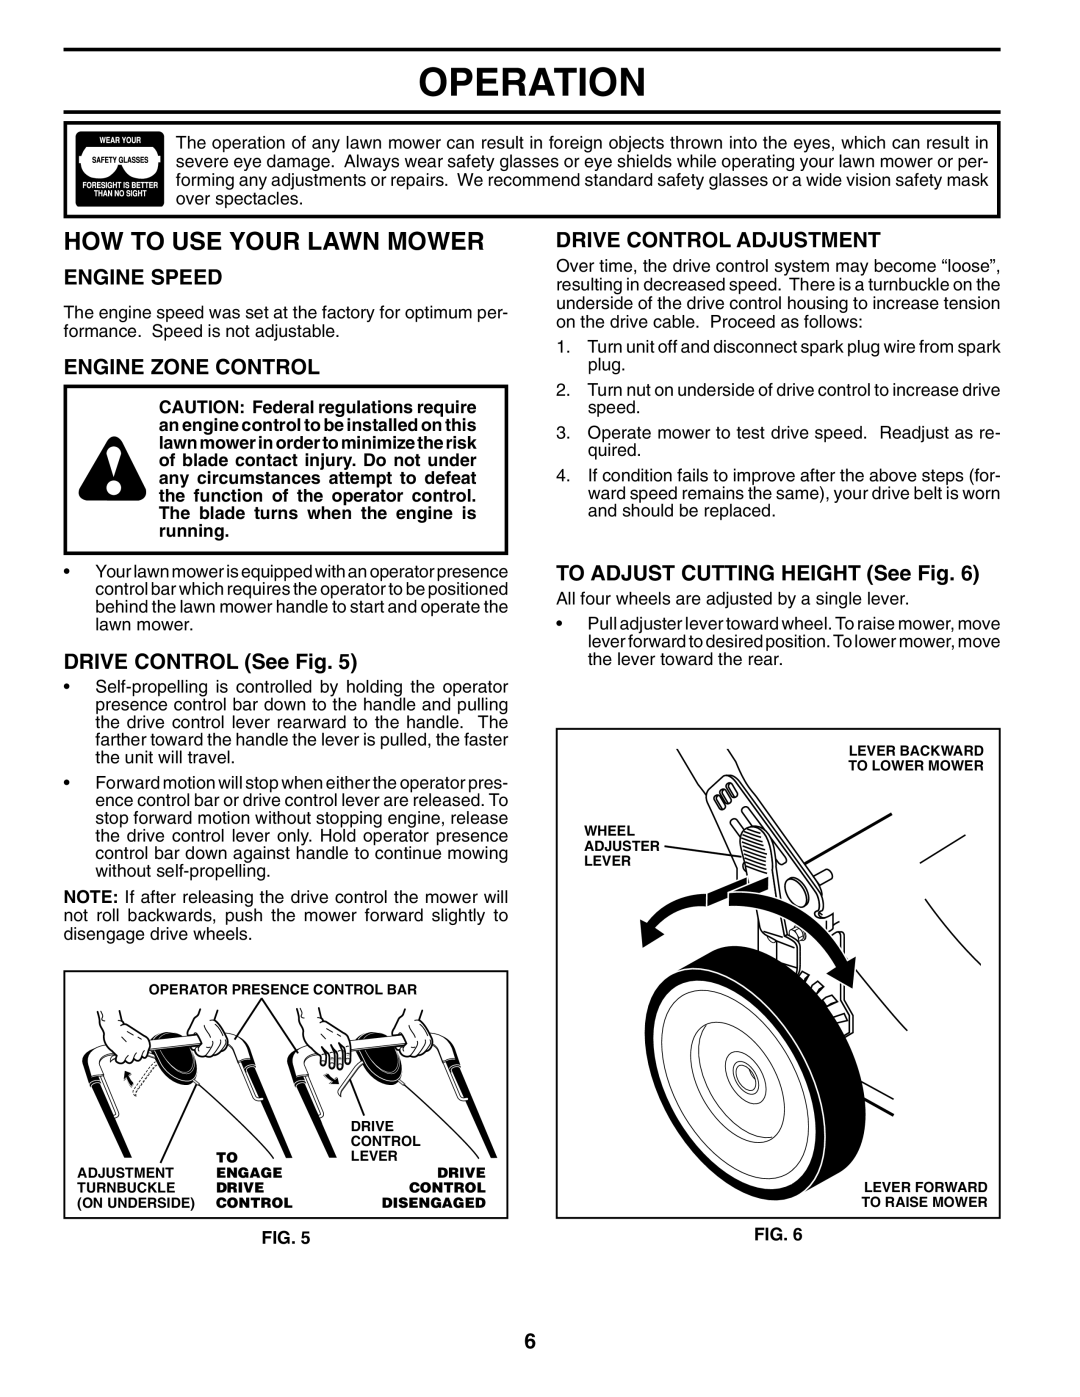 Husqvarna 5521RSX owner manual HOW to USE Your Lawn Mower, Engine Speed, Engine Zone Control, Drive Control Adjustment 